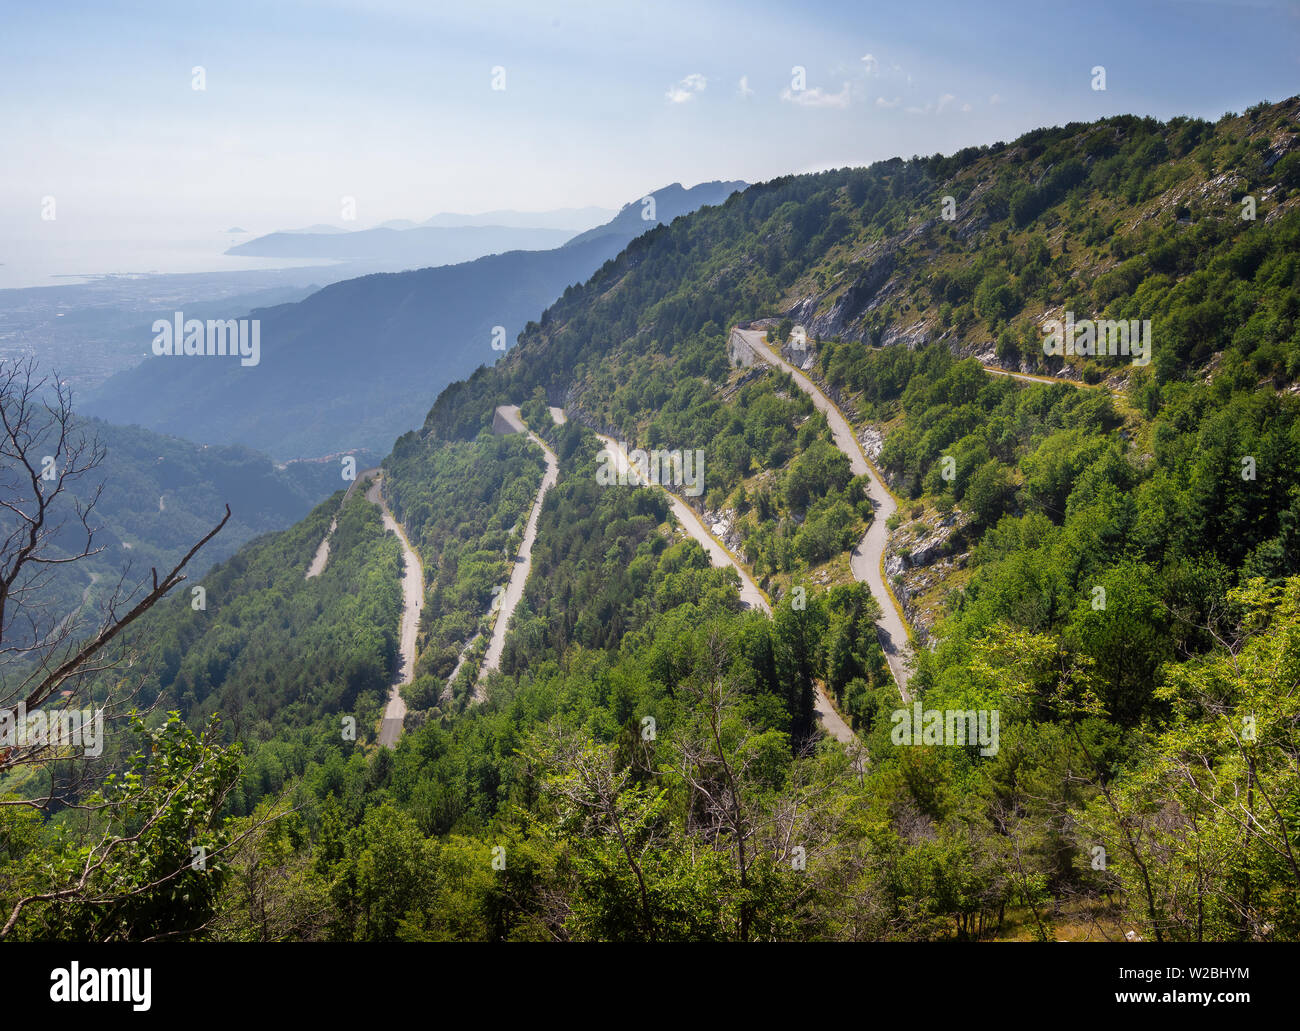 View of zigzag mountain road with hairpin bends in the Apuan Alps, Alpi Apuane, near the Vestito Pass. Above Massa Carrara, Italy. Less travelled. Stock Photo